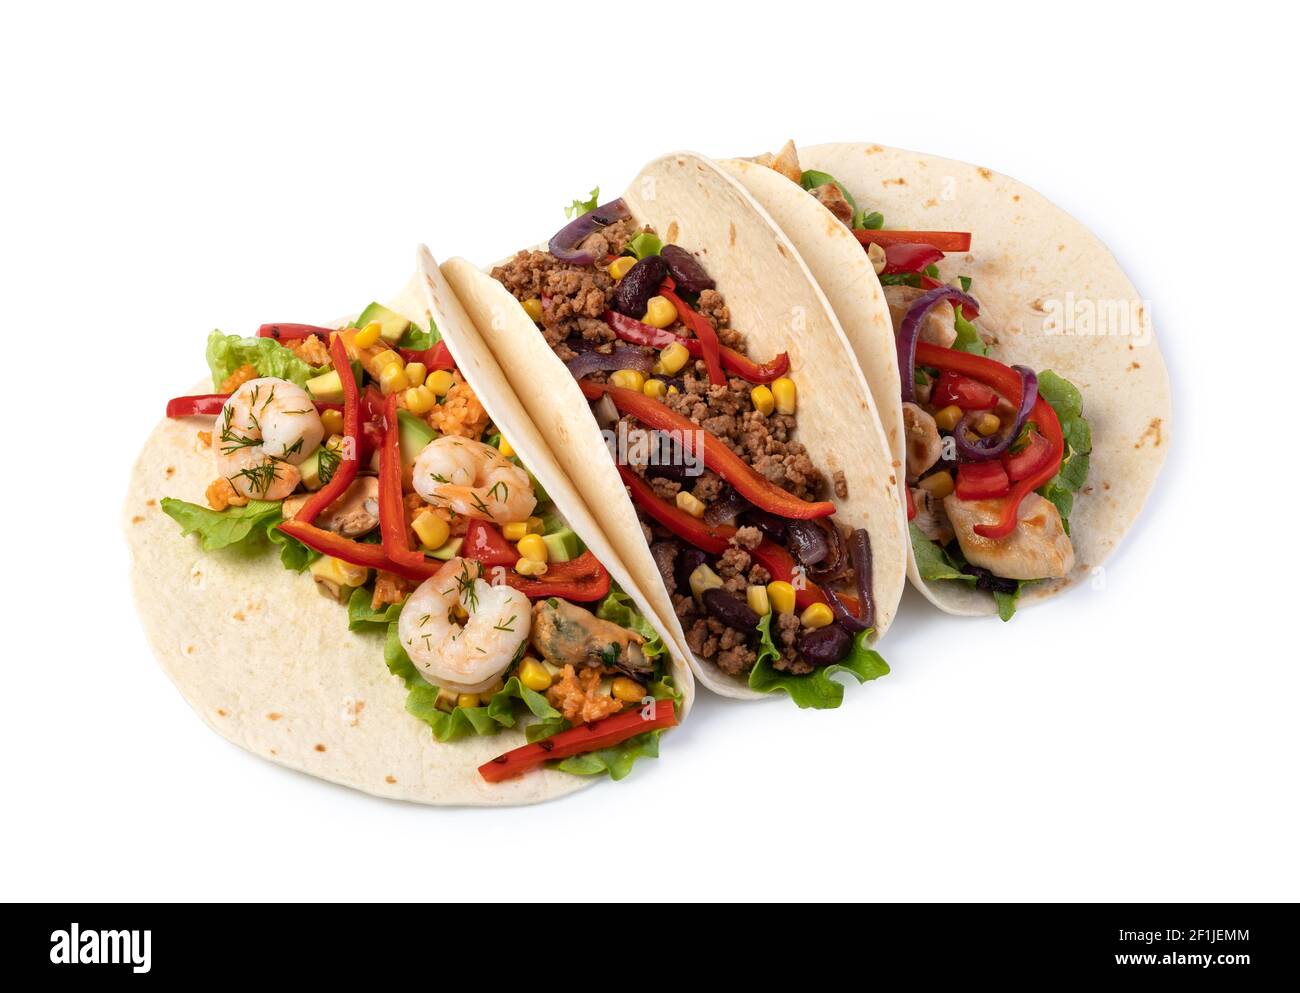 Burrito with vegetables and tortilla, Stock Photo